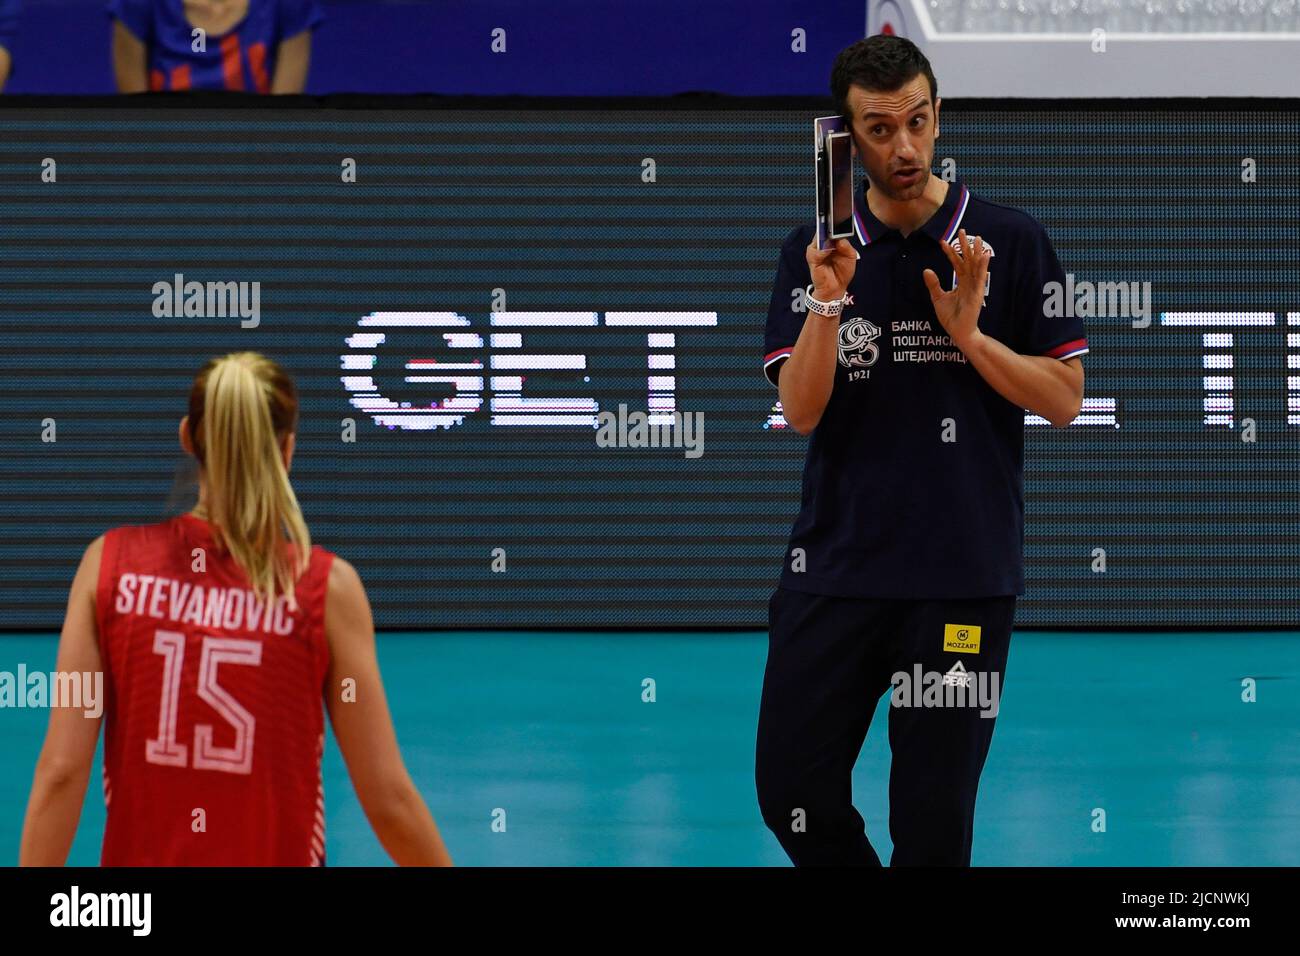 Brasilia, Brazil. 14th June, 2022. DF - Brasilia - 06/14/2022 - WOMEN'S VOLLEY LEAGUE OF NATIONS SERBIA X ITALY - Serbia coach Daniele Santarelli guides players in the match against Italy at Nilson Nelson Gymnasium for the Women's Volleyball Nations League 2022. Photo: Mateus Bonomi/AGIF/Sipa USA Credit: Sipa USA/Alamy Live News Stock Photo